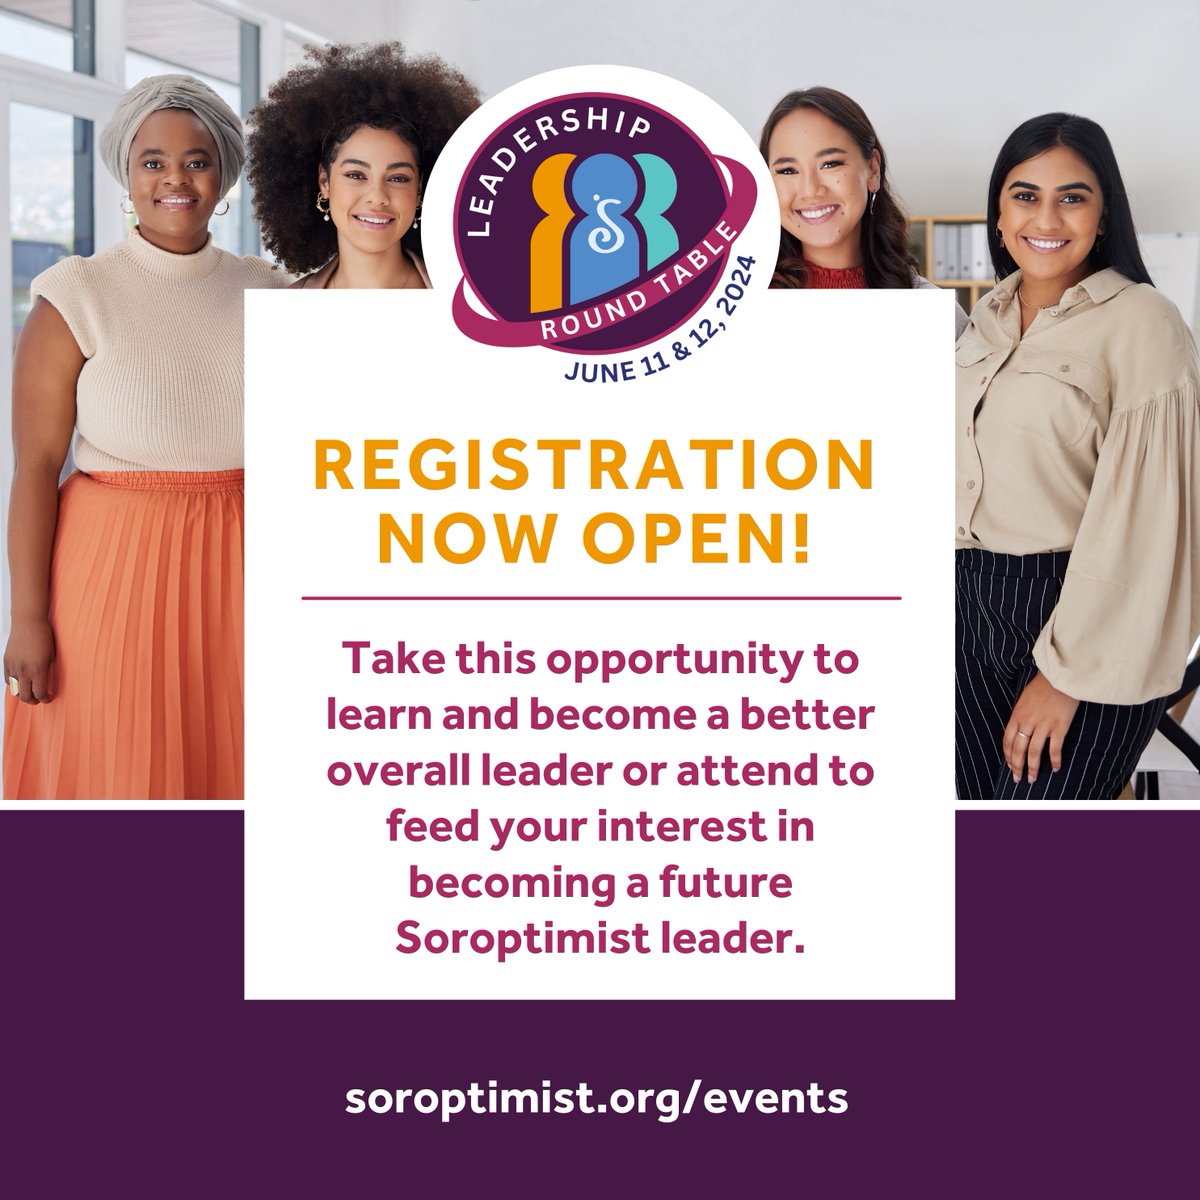 🌟 REGISTRATION NOW OPEN! 🌟 Whether you're eager to enhance your leadership skills or aspire to lead in the future, the Leadership Round Table is your chance to learn and grow! Check out the agenda and register: soroptimist.org/events/leaders…